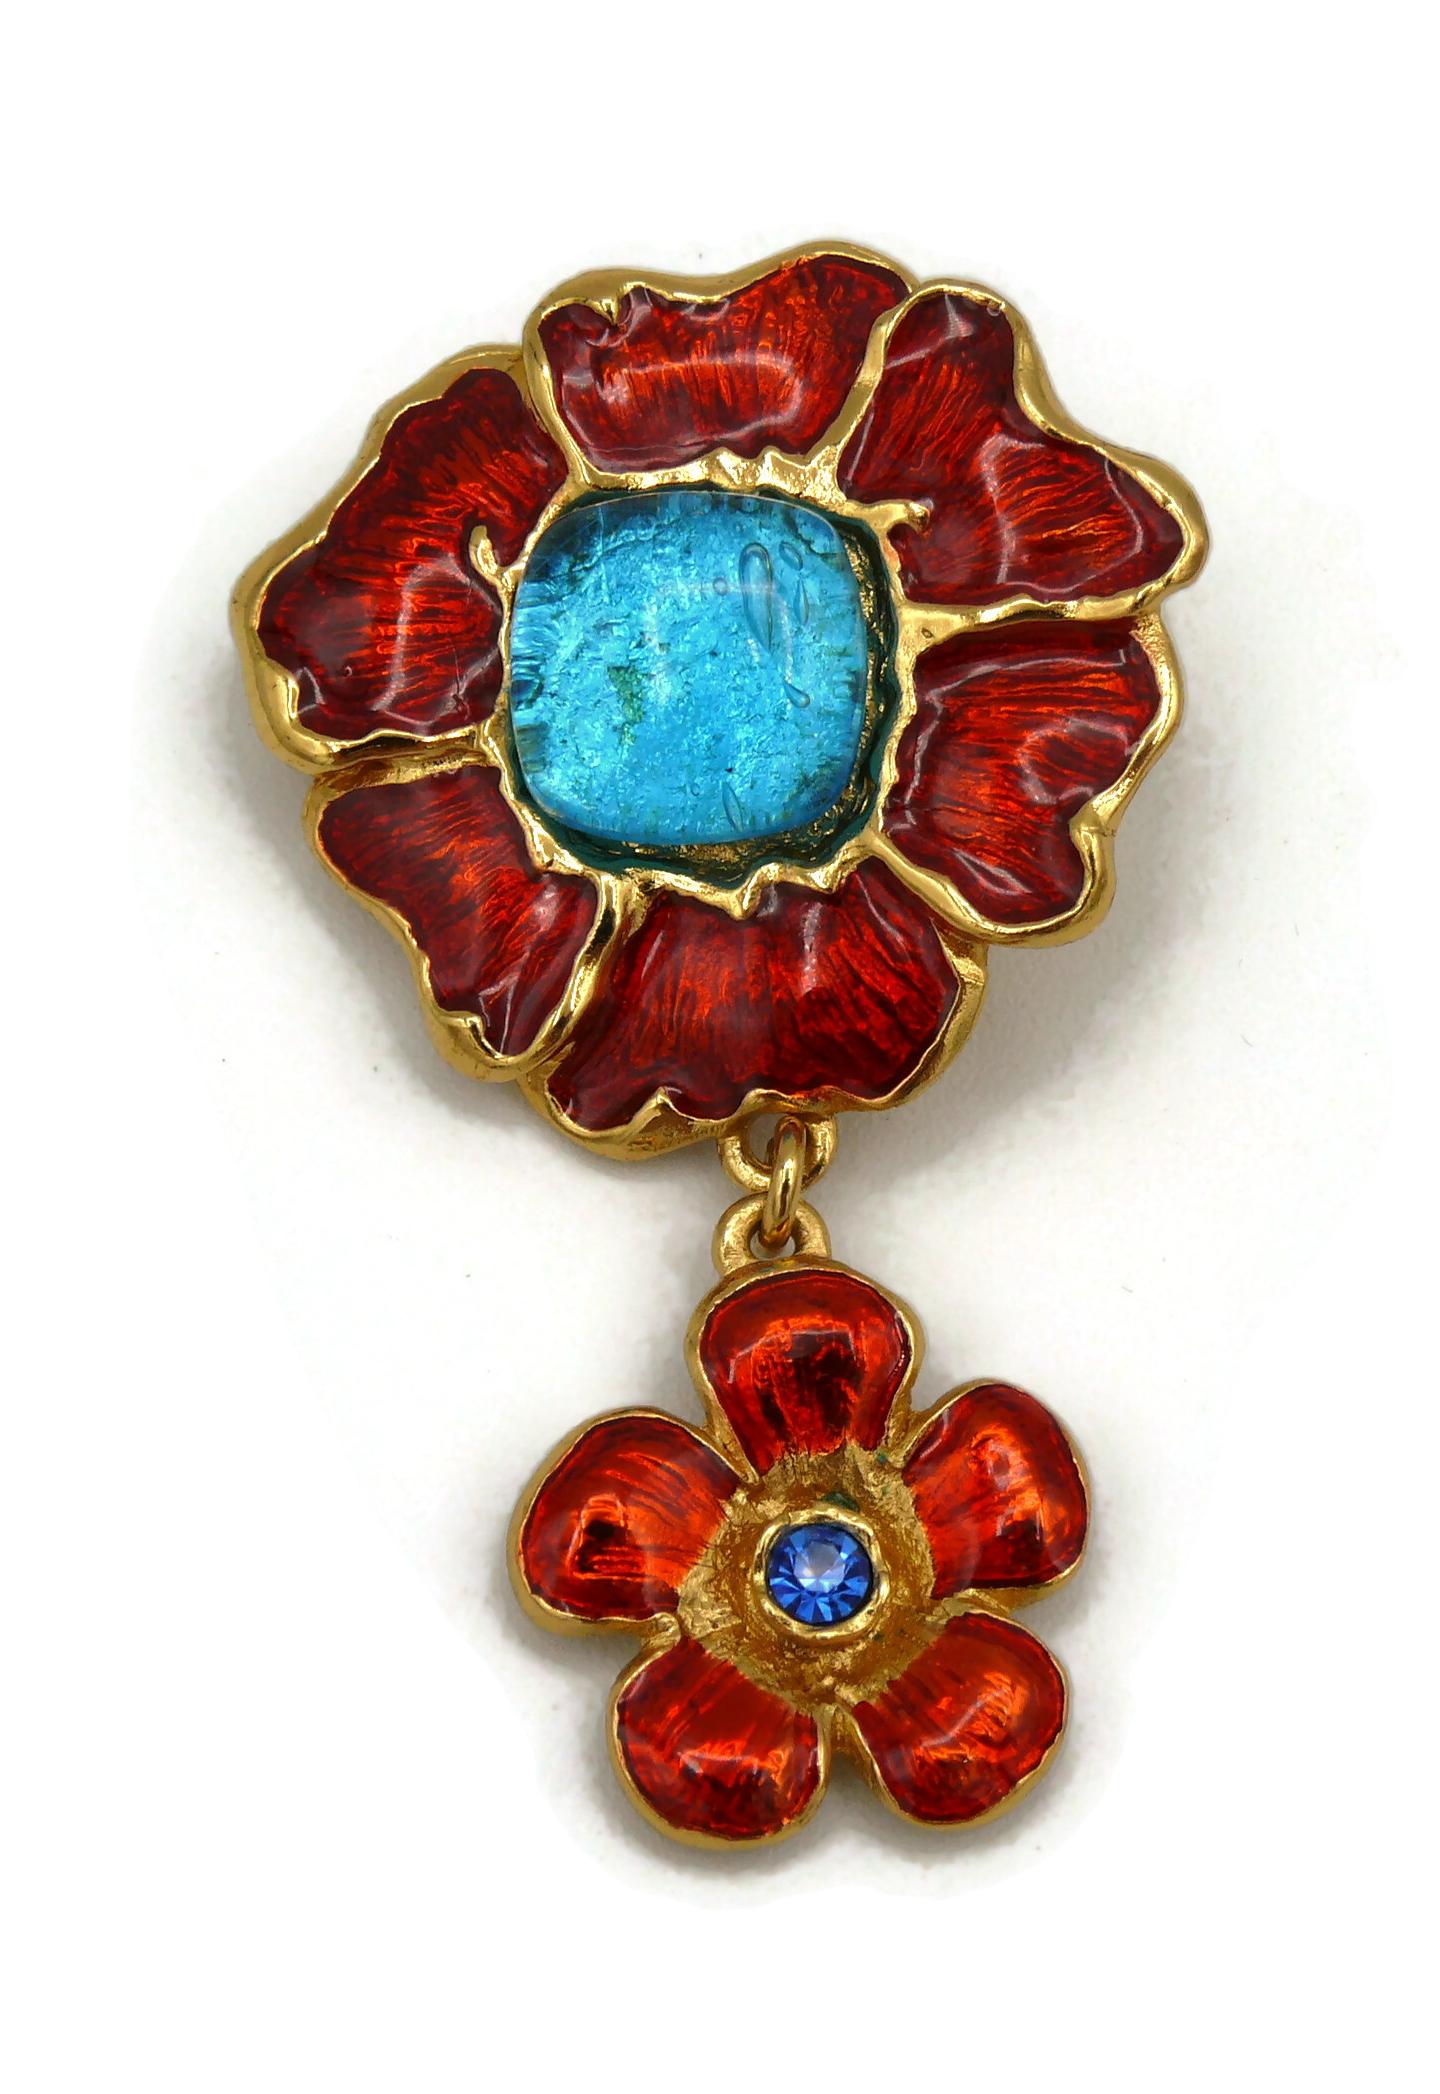 YVES SAINT LAURENT vintage floral pendant embellished with red enamel, acqua blue glass cabochons and sapphire colour crystal.

Embossed YSL.
Made in France.

Indicative measurements : height approx. 6 cm (2.36 inches) / max. width approx. 4 cm